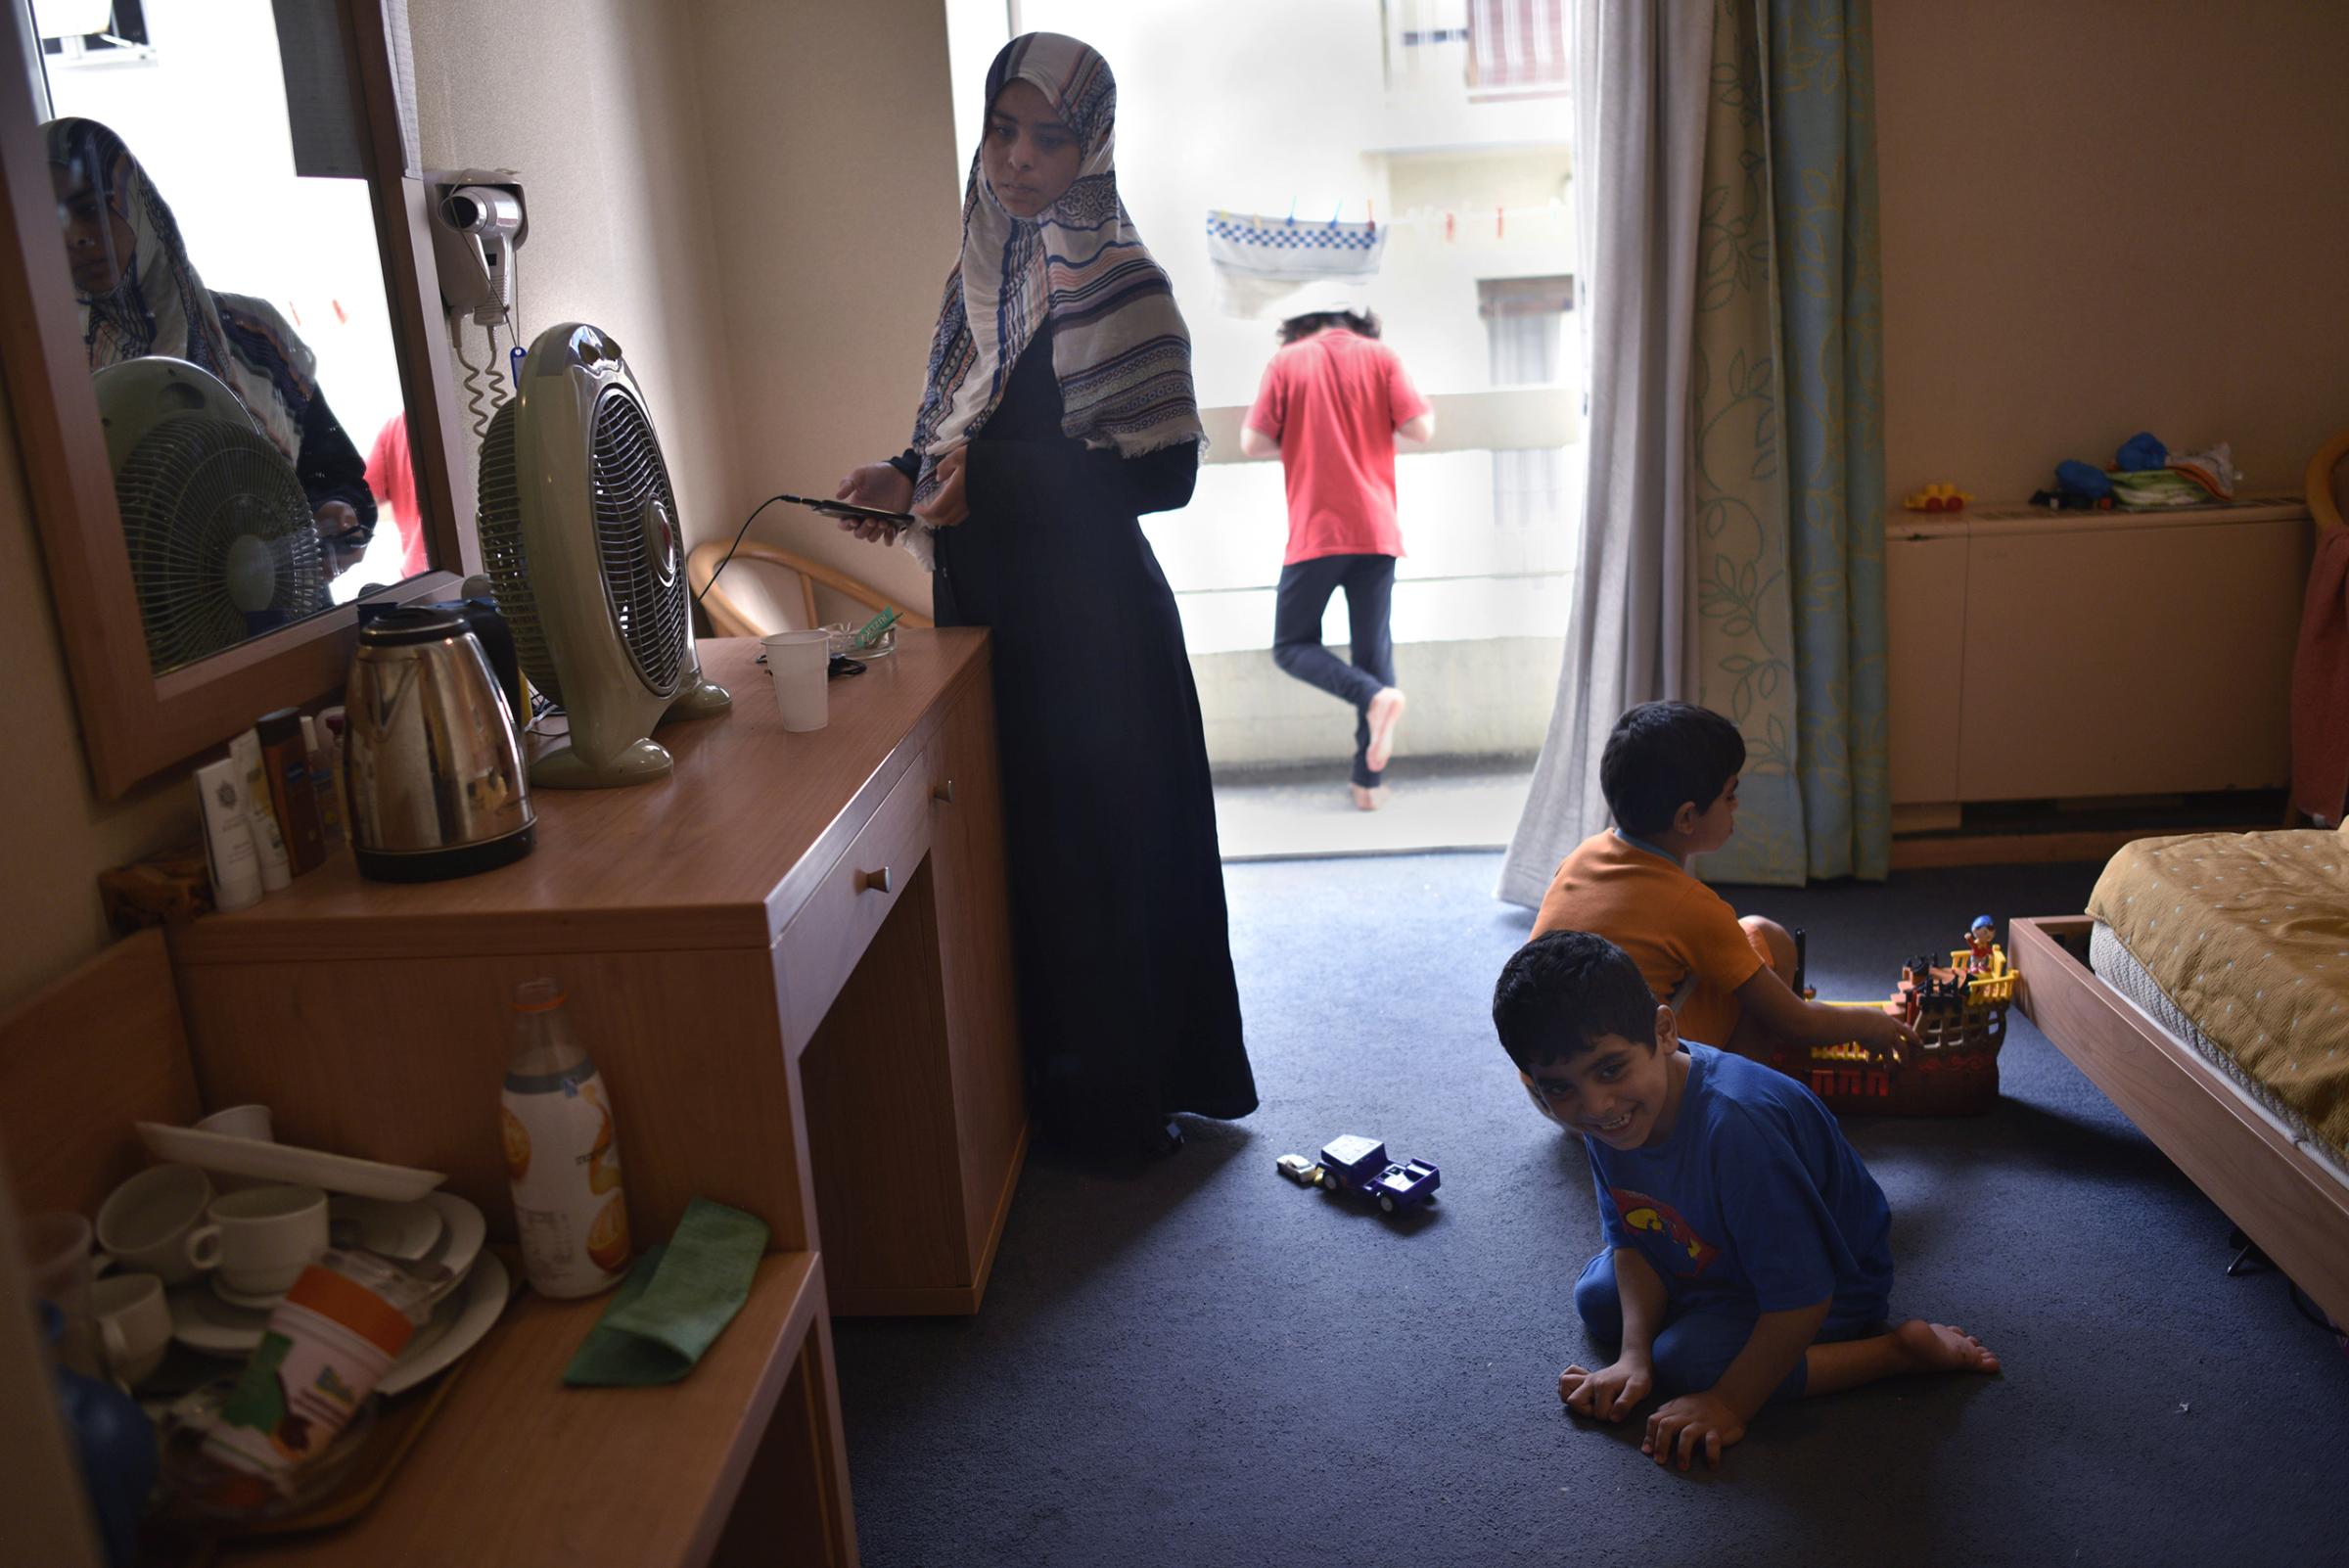 Baida, 27, from Raqqa, Syria, keeps an eye on her three children as they play in her family’s room at the hotel. Her youngest son, 7-year-old Ahmed, has cerebral palsy and cannot walk. He has a wheelchair, but because the elevators are not working in the eight-floor building, the family keeps the wheelchair downstairs in the lobby.